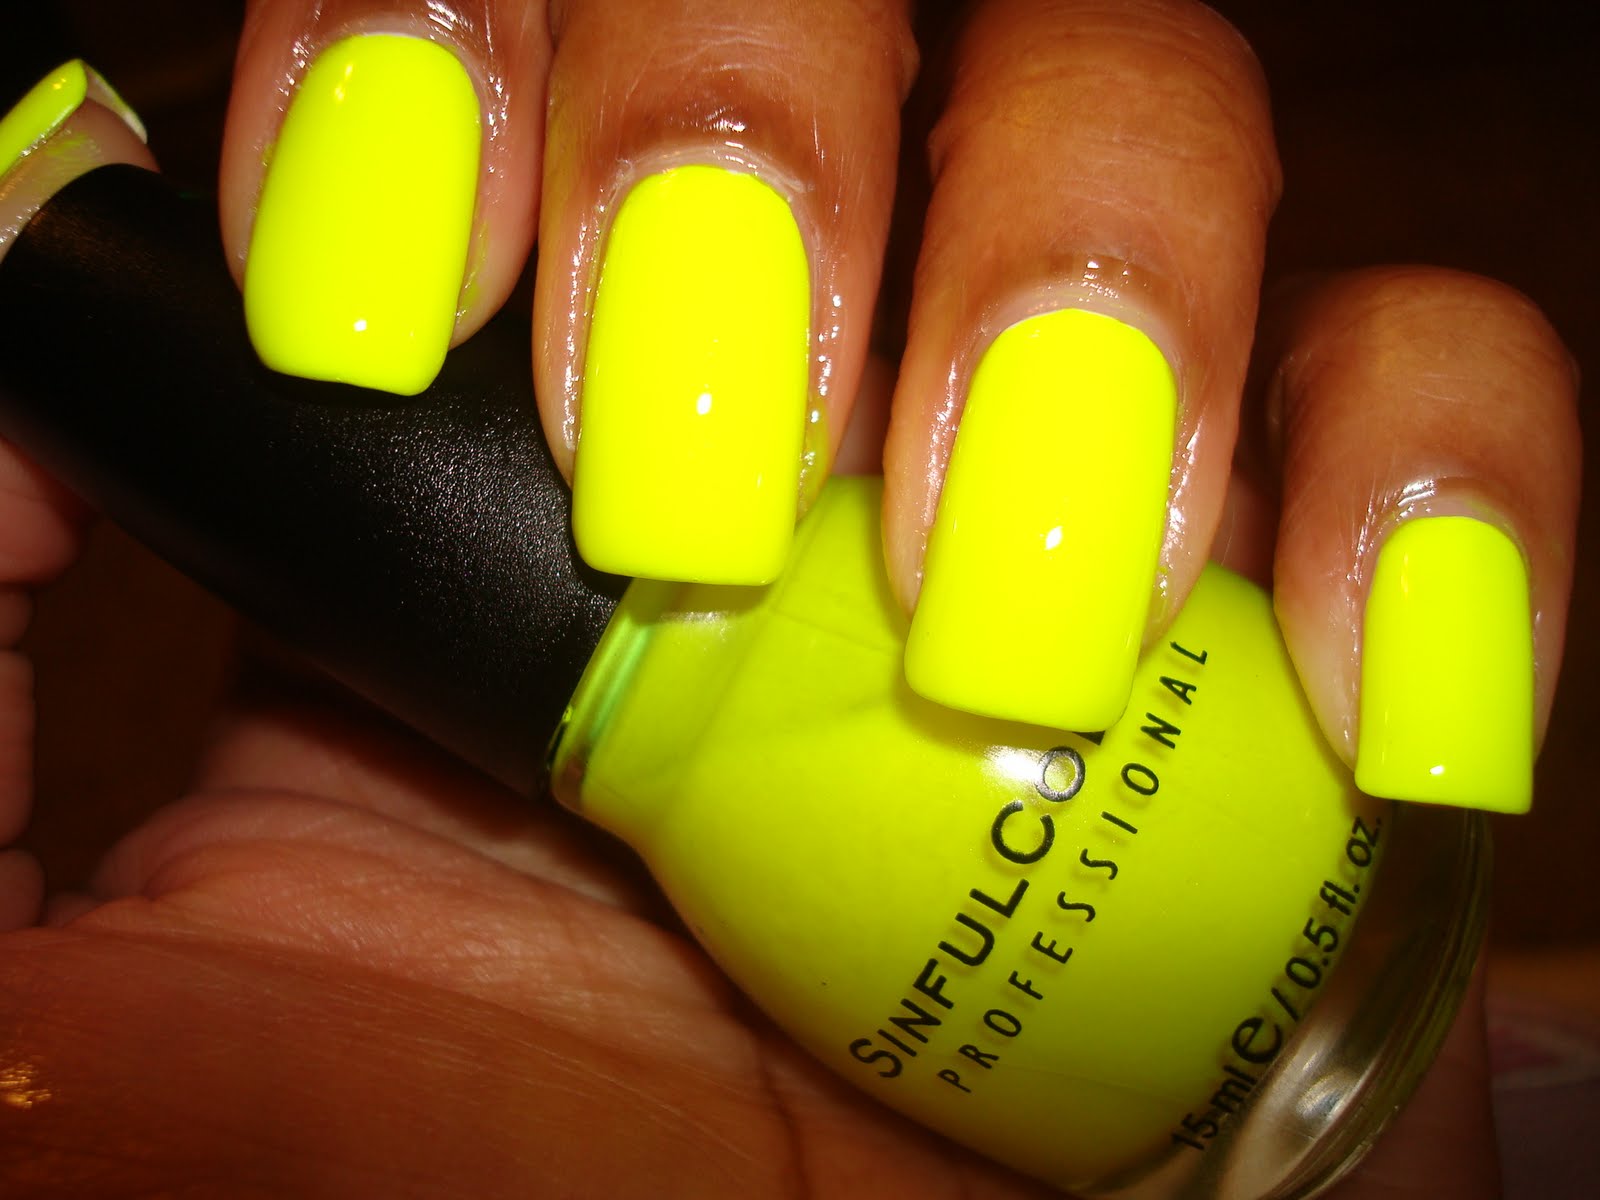 1. Sinful Colors Acid Test Nail Polish in "Neon Melon" - wide 3